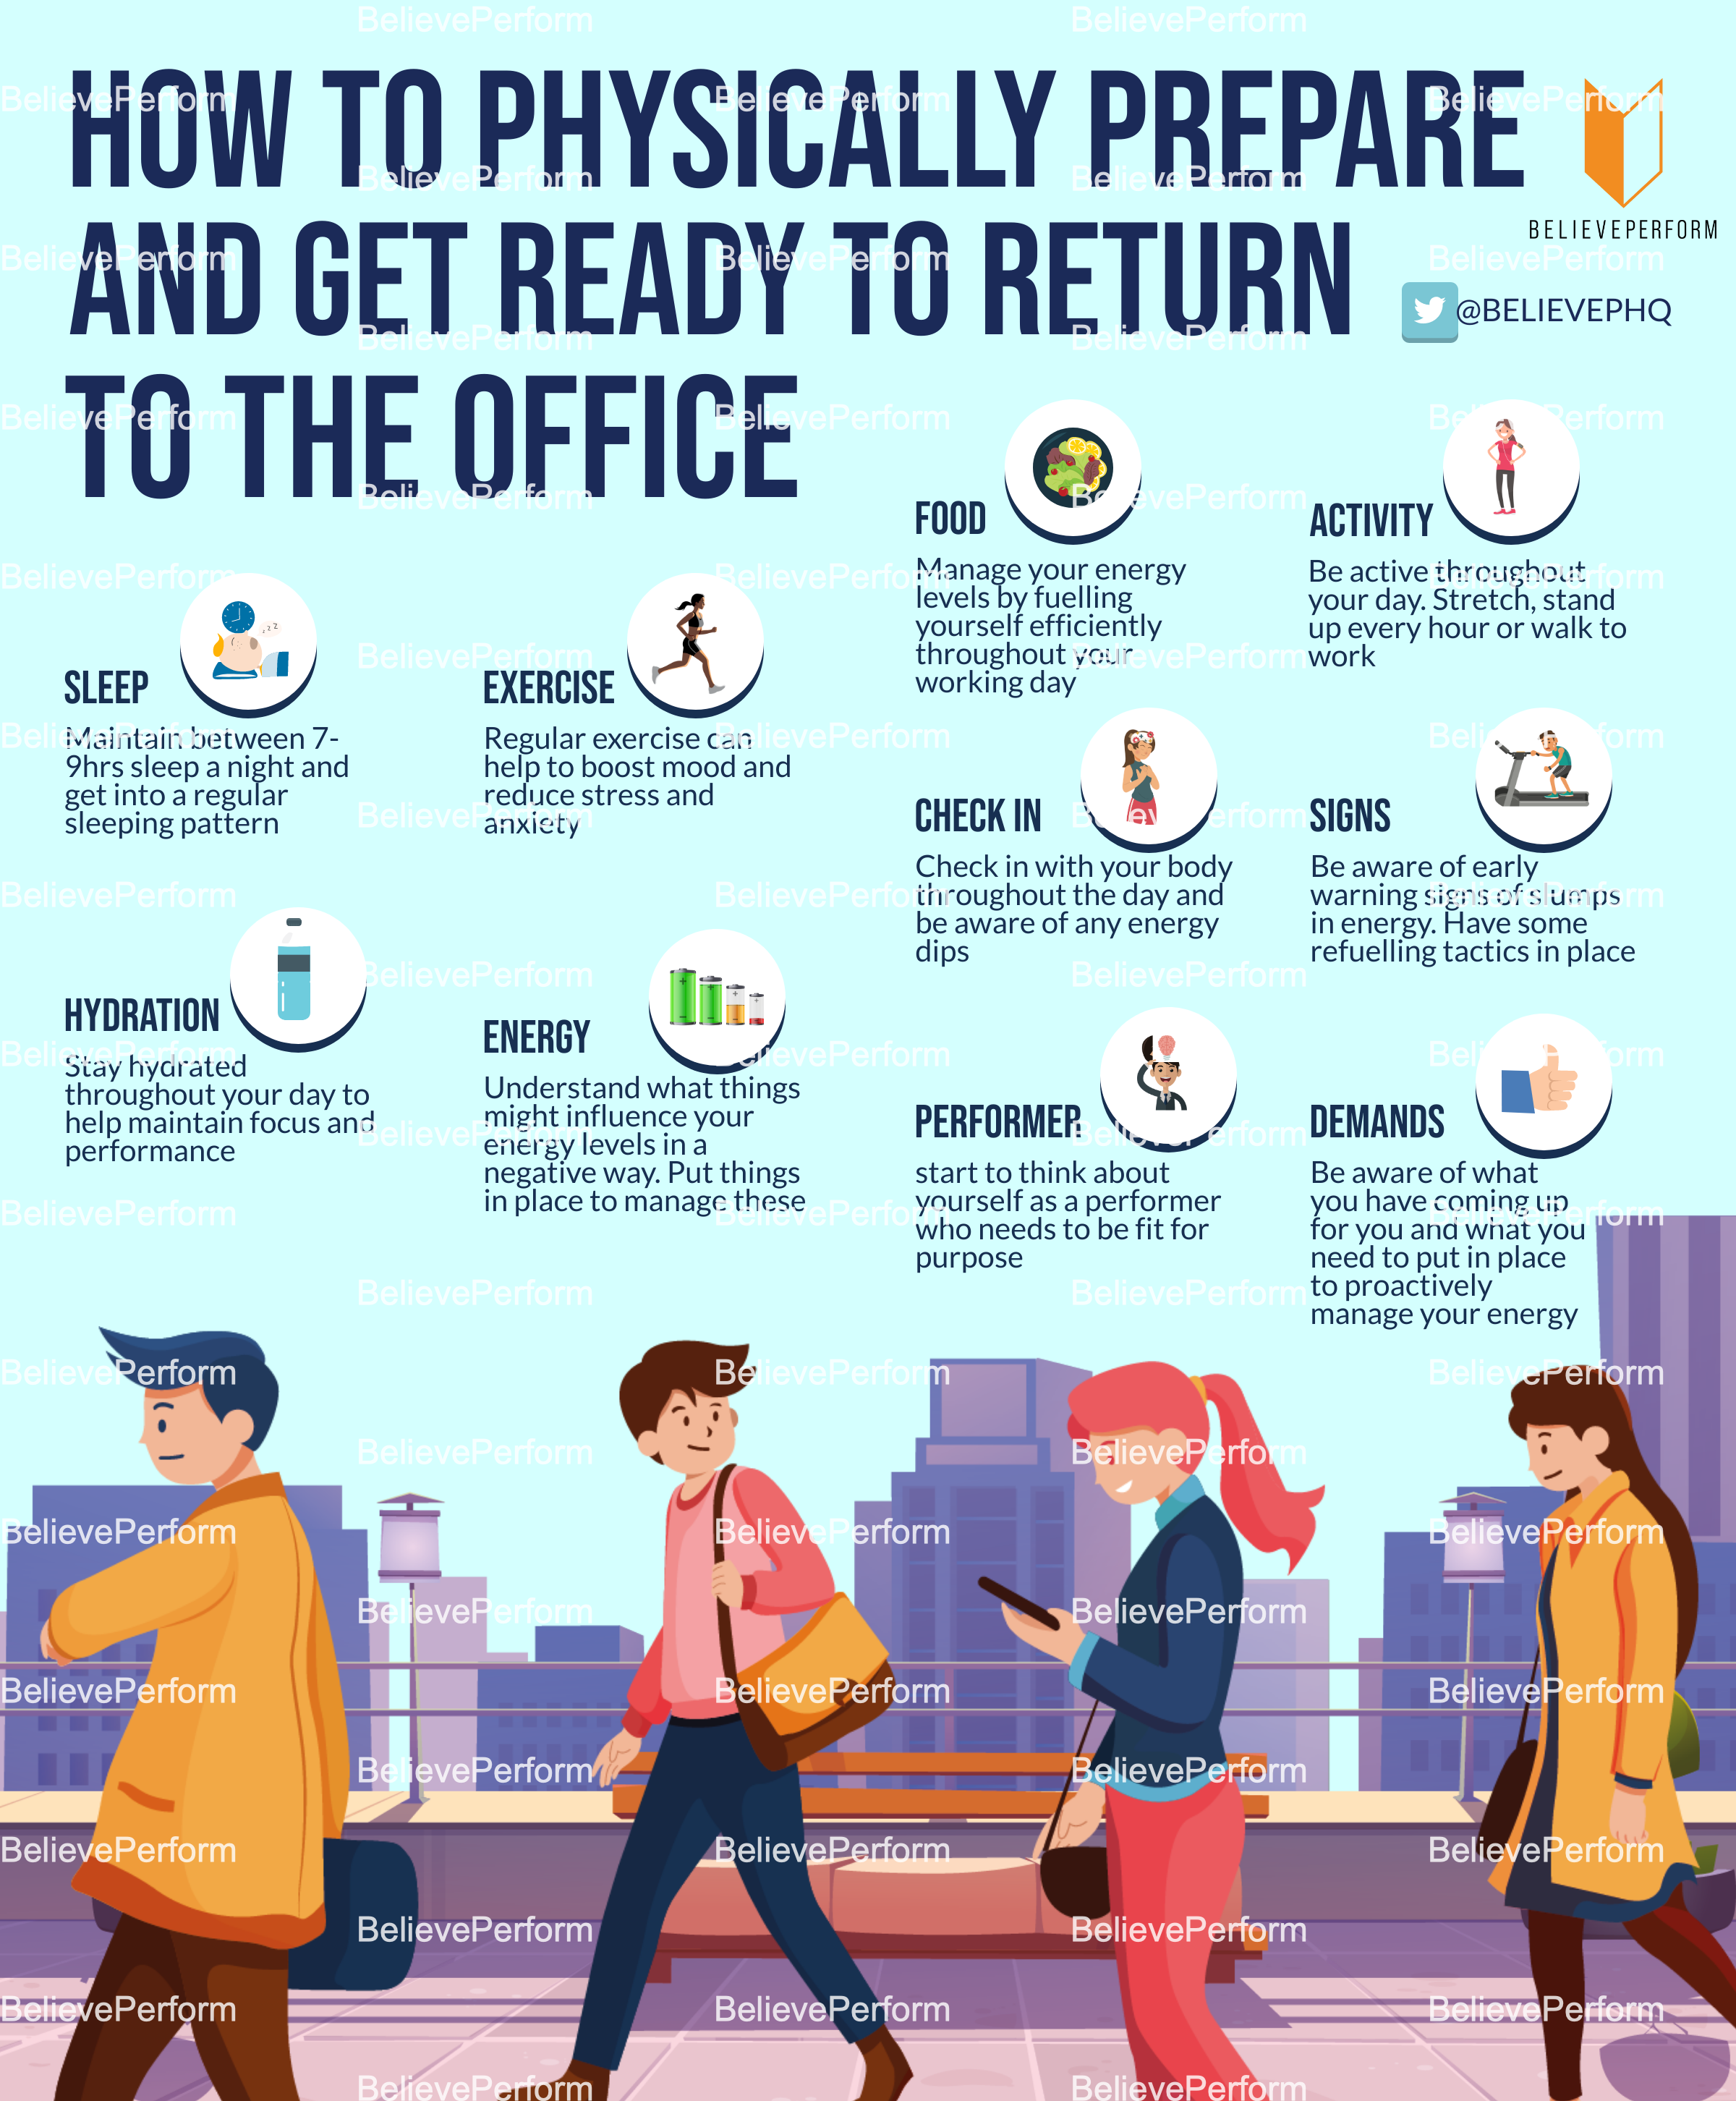 How to physically prepare and get ready to return to the office